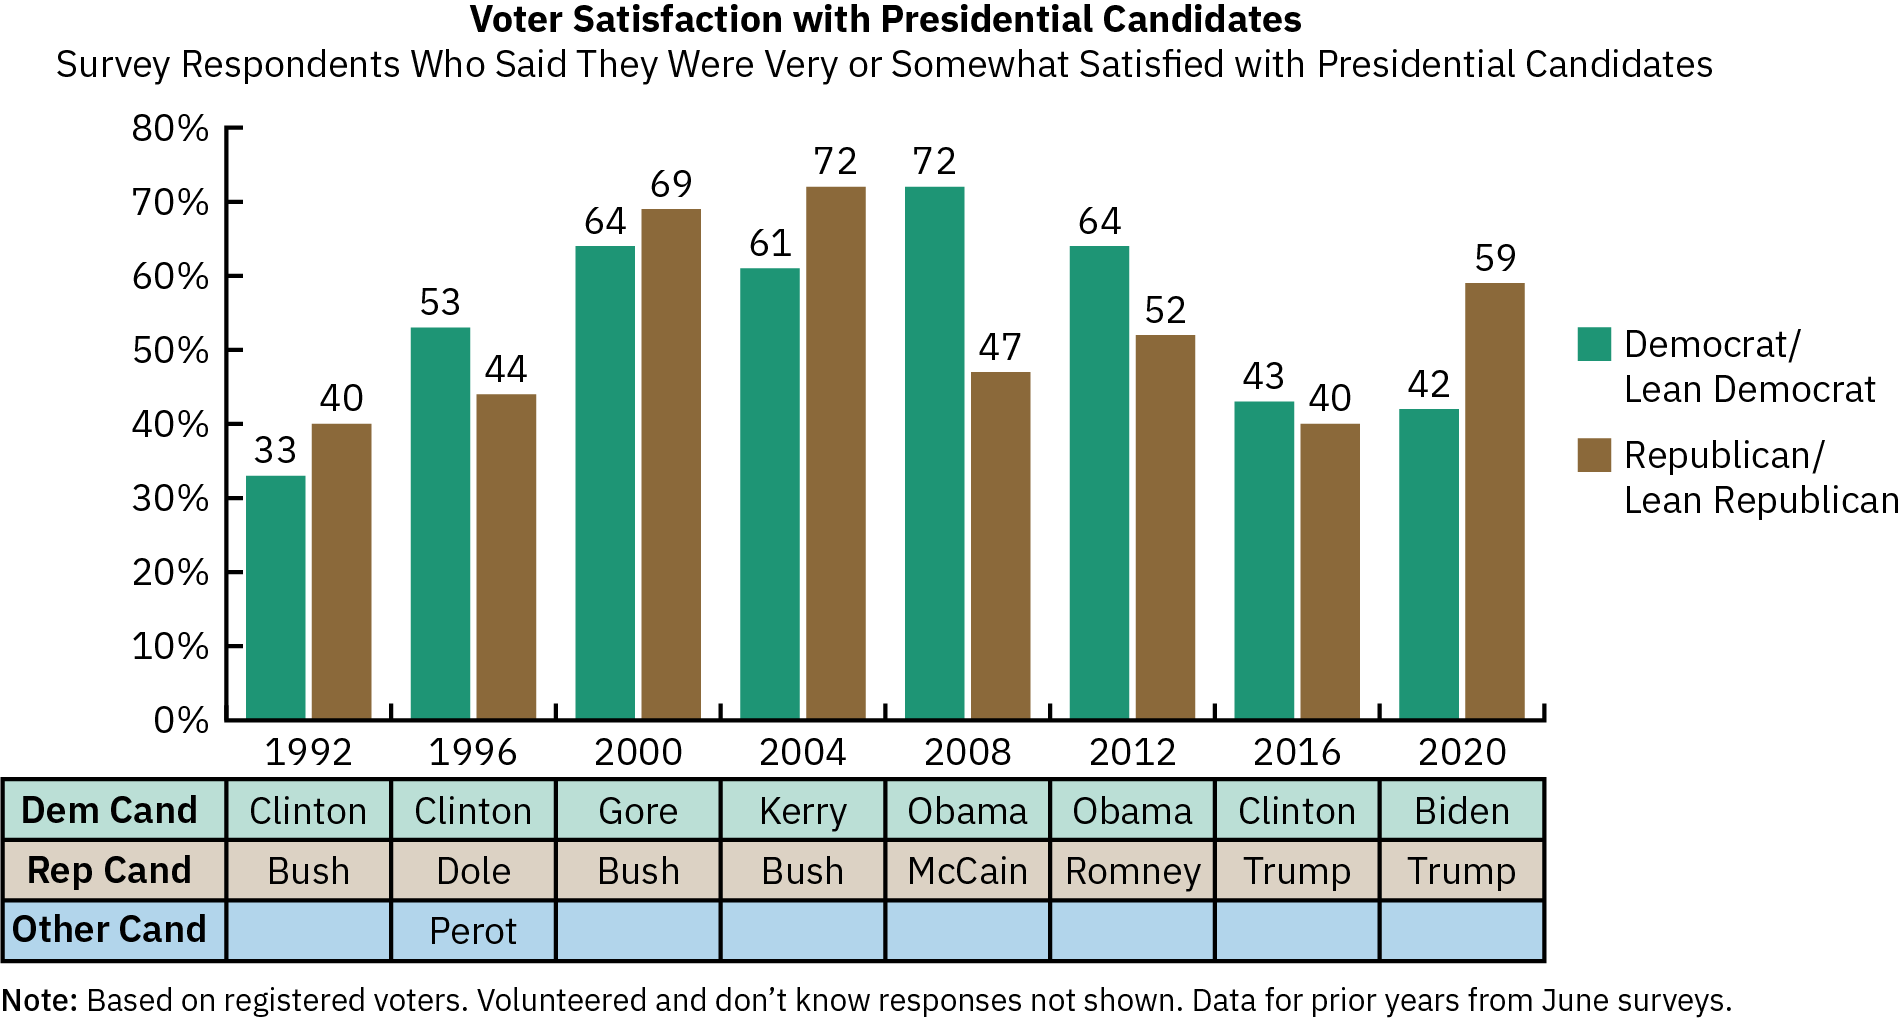 A bar graph shows voters’ satisfaction with presidential candidates from 1992 through 2020. Voters who identified as Democrats showed the least satisfaction (33%) in 1992 when Bill Clinton was the Democratic nominee and showed the most satisfaction (72%) in 2008 when Barack Obama was the Democratic nominee. Voters who identified as Republicans showed the least satisfaction (40%) in 1992 and 2016 when George H.W. Bush and Donald Trump (respectively) were the Republican nominee. Republican voters showed the most satisfaction (72%) in 2004 when George W. Bush was the Republican nominee.